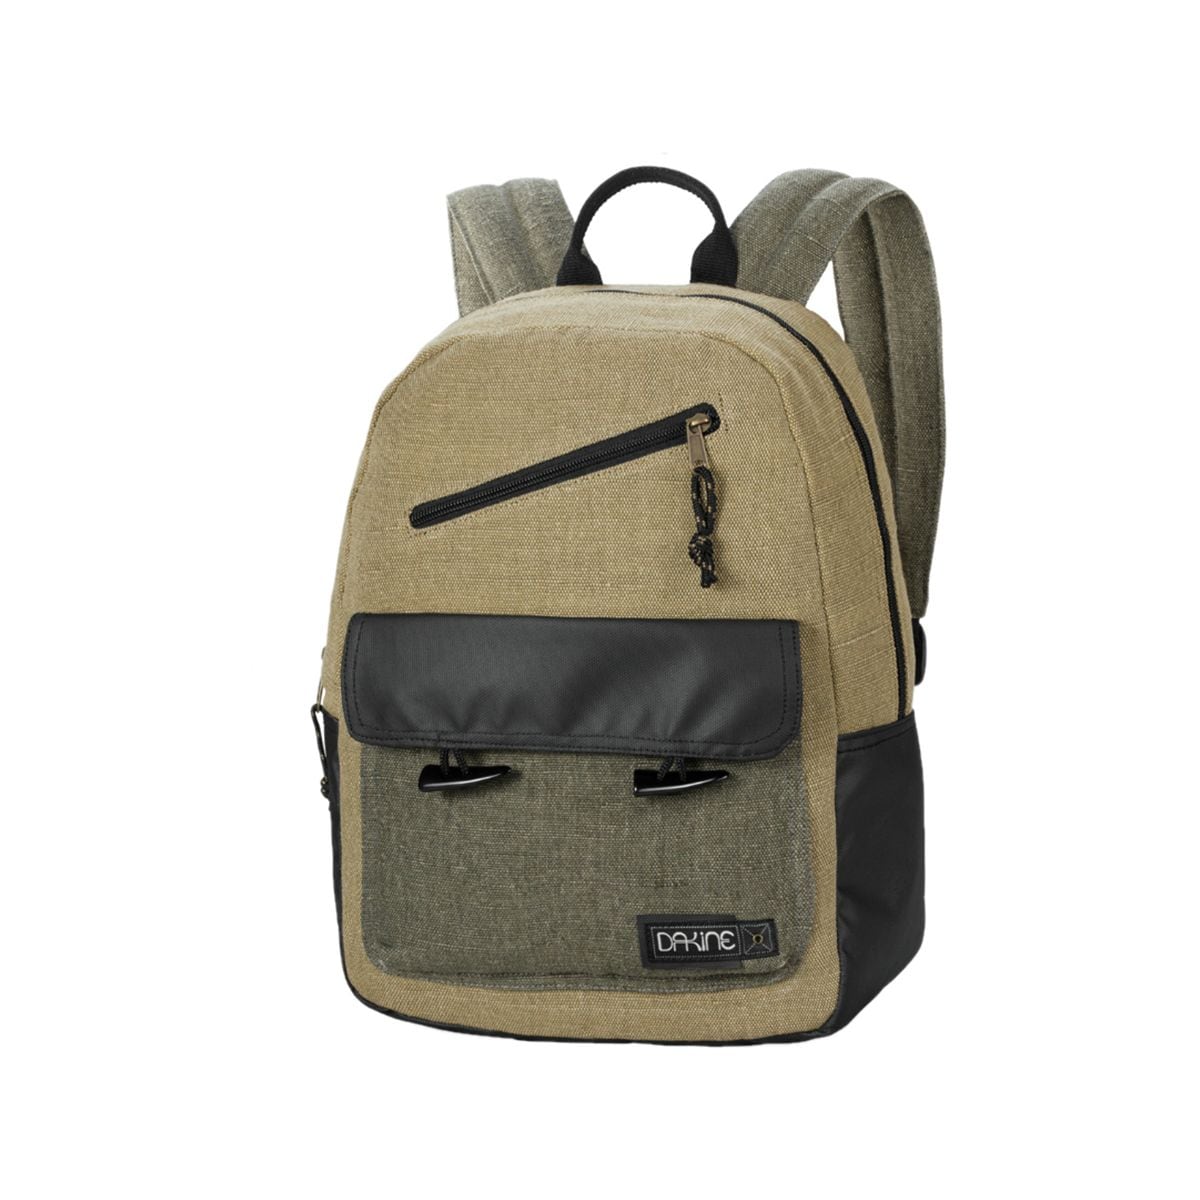 Details about DAKINE Willow 18L Laptop Backpack  Women39;s  1100cu in